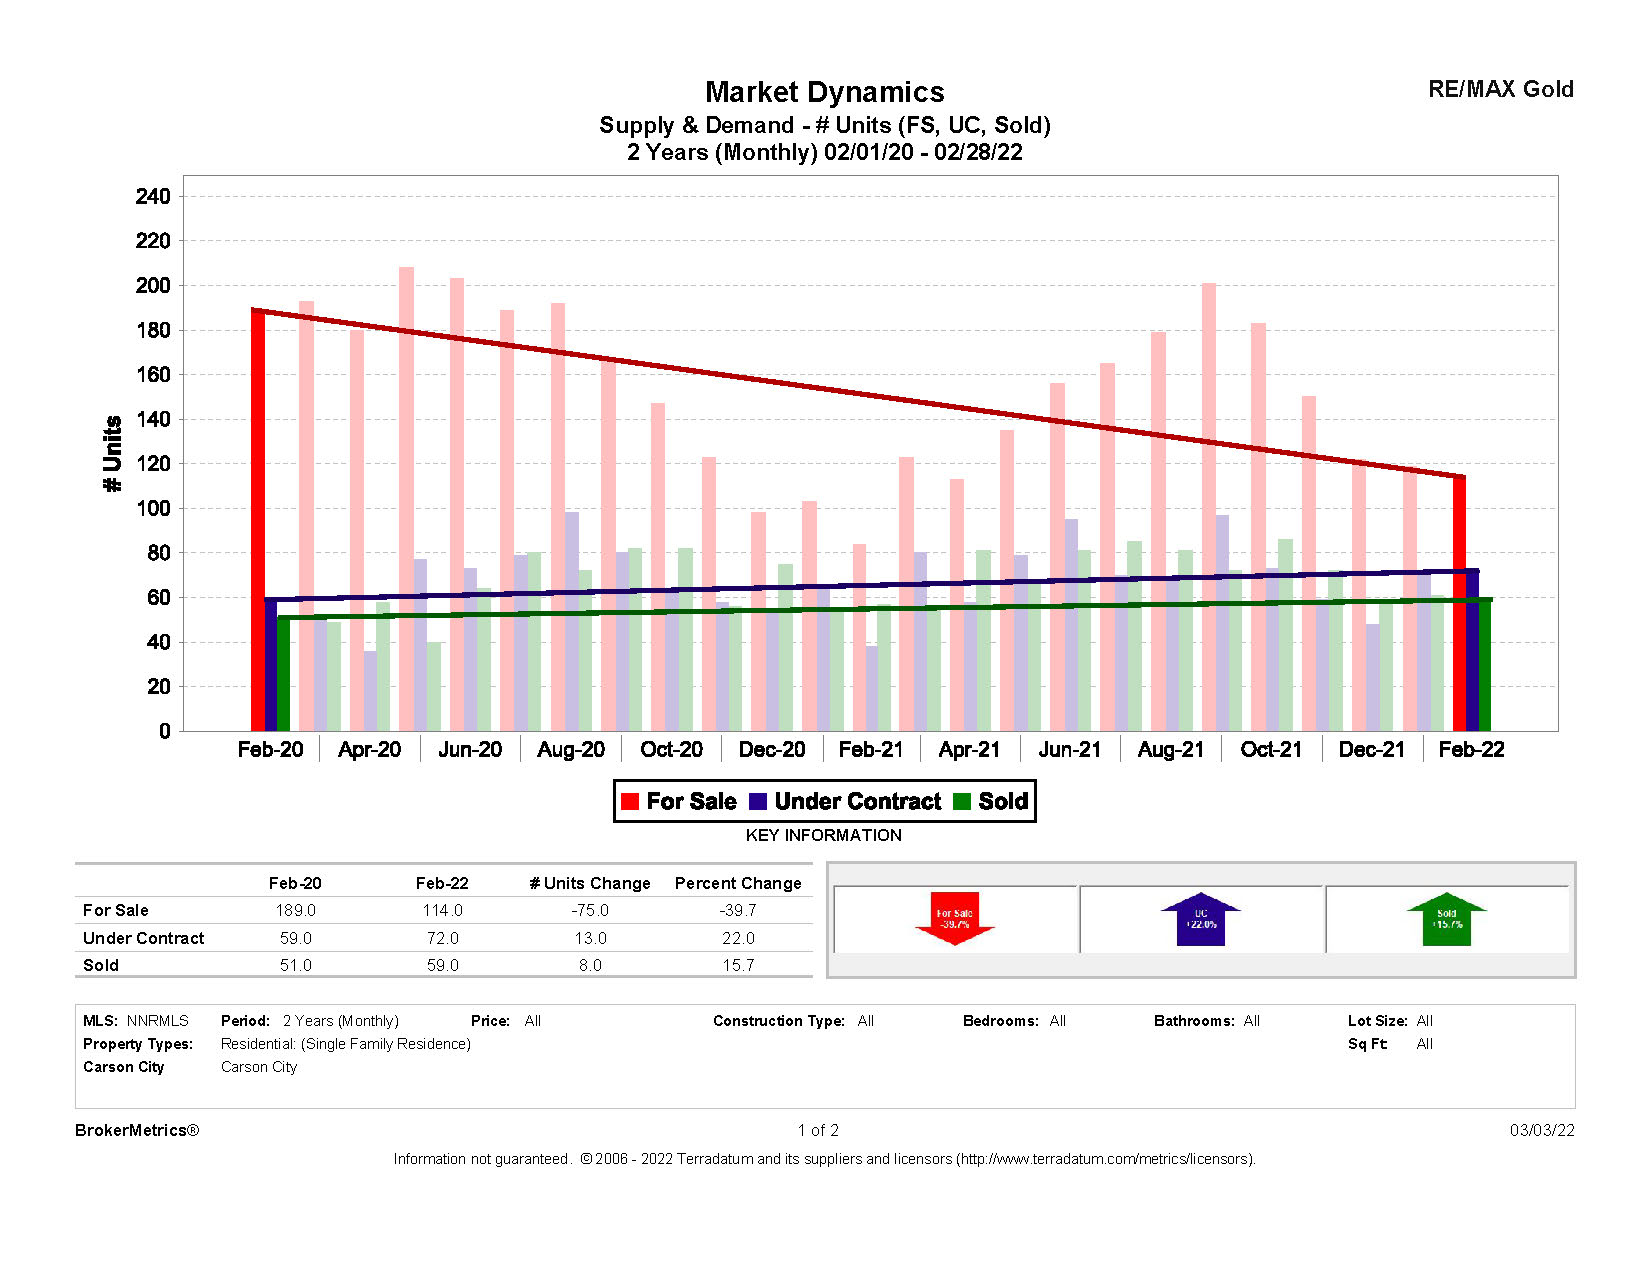 February Stats: Supply and Demand graph for Carson City, NV